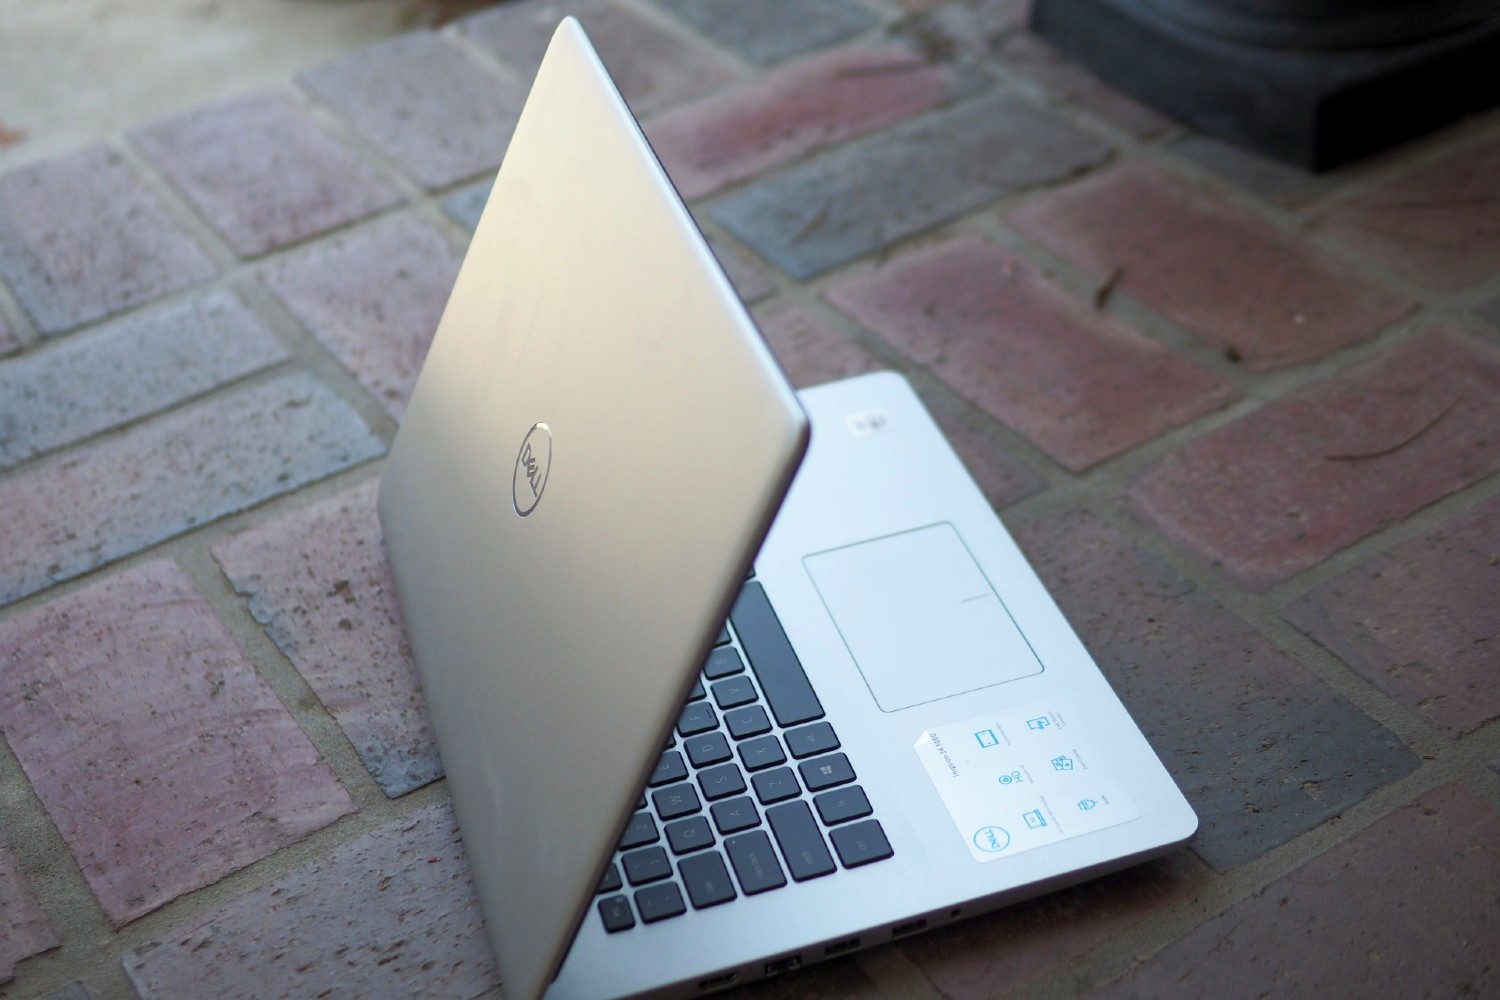 Dell Inspiron 14 5000 Review: Too Cheap to Be Good? | Digital Trends